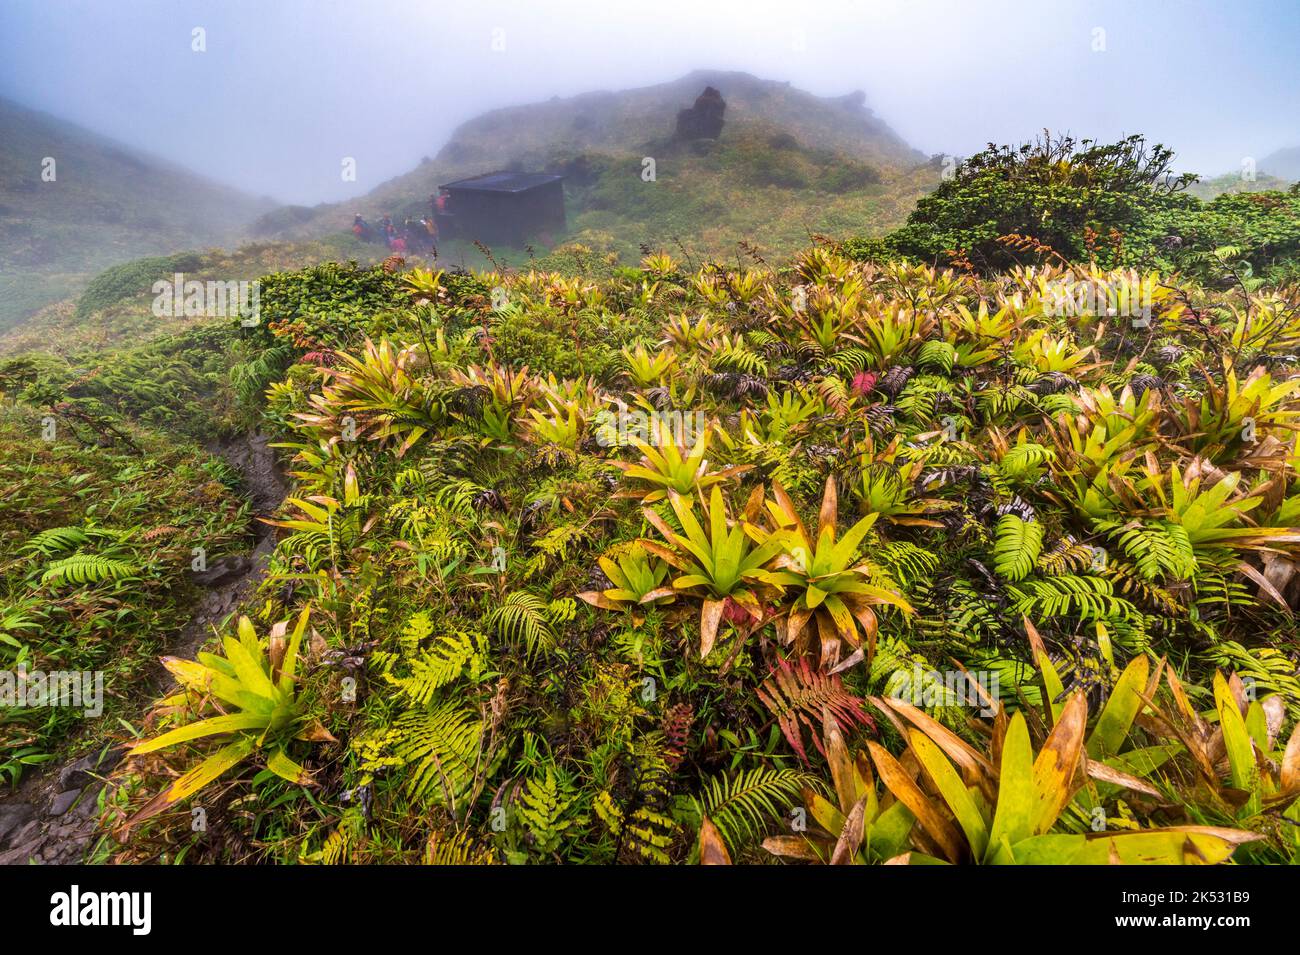 France, Caribbean, Lesser Antilles, Martinique, Morne-Rouge, Mountain pineapple (Pitcairnia spicata) in the crater of Montagne Pelée volcano (1395 m) Stock Photo